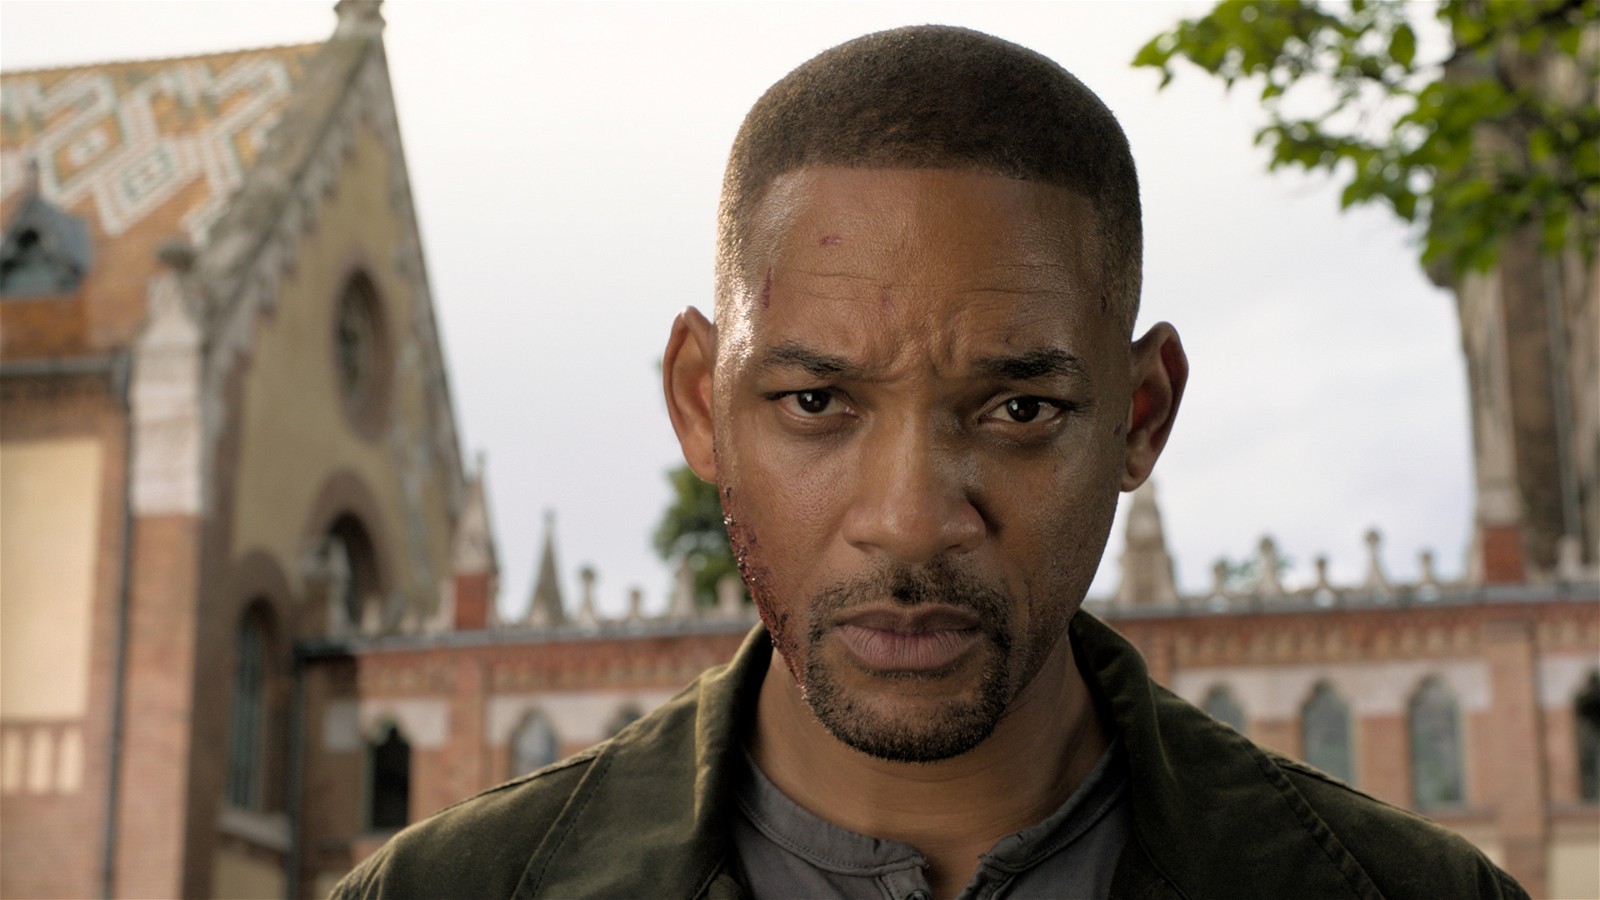 Will Smith(from Gemini Man) and Jamie Foxx would be exciting picks for Black Panther